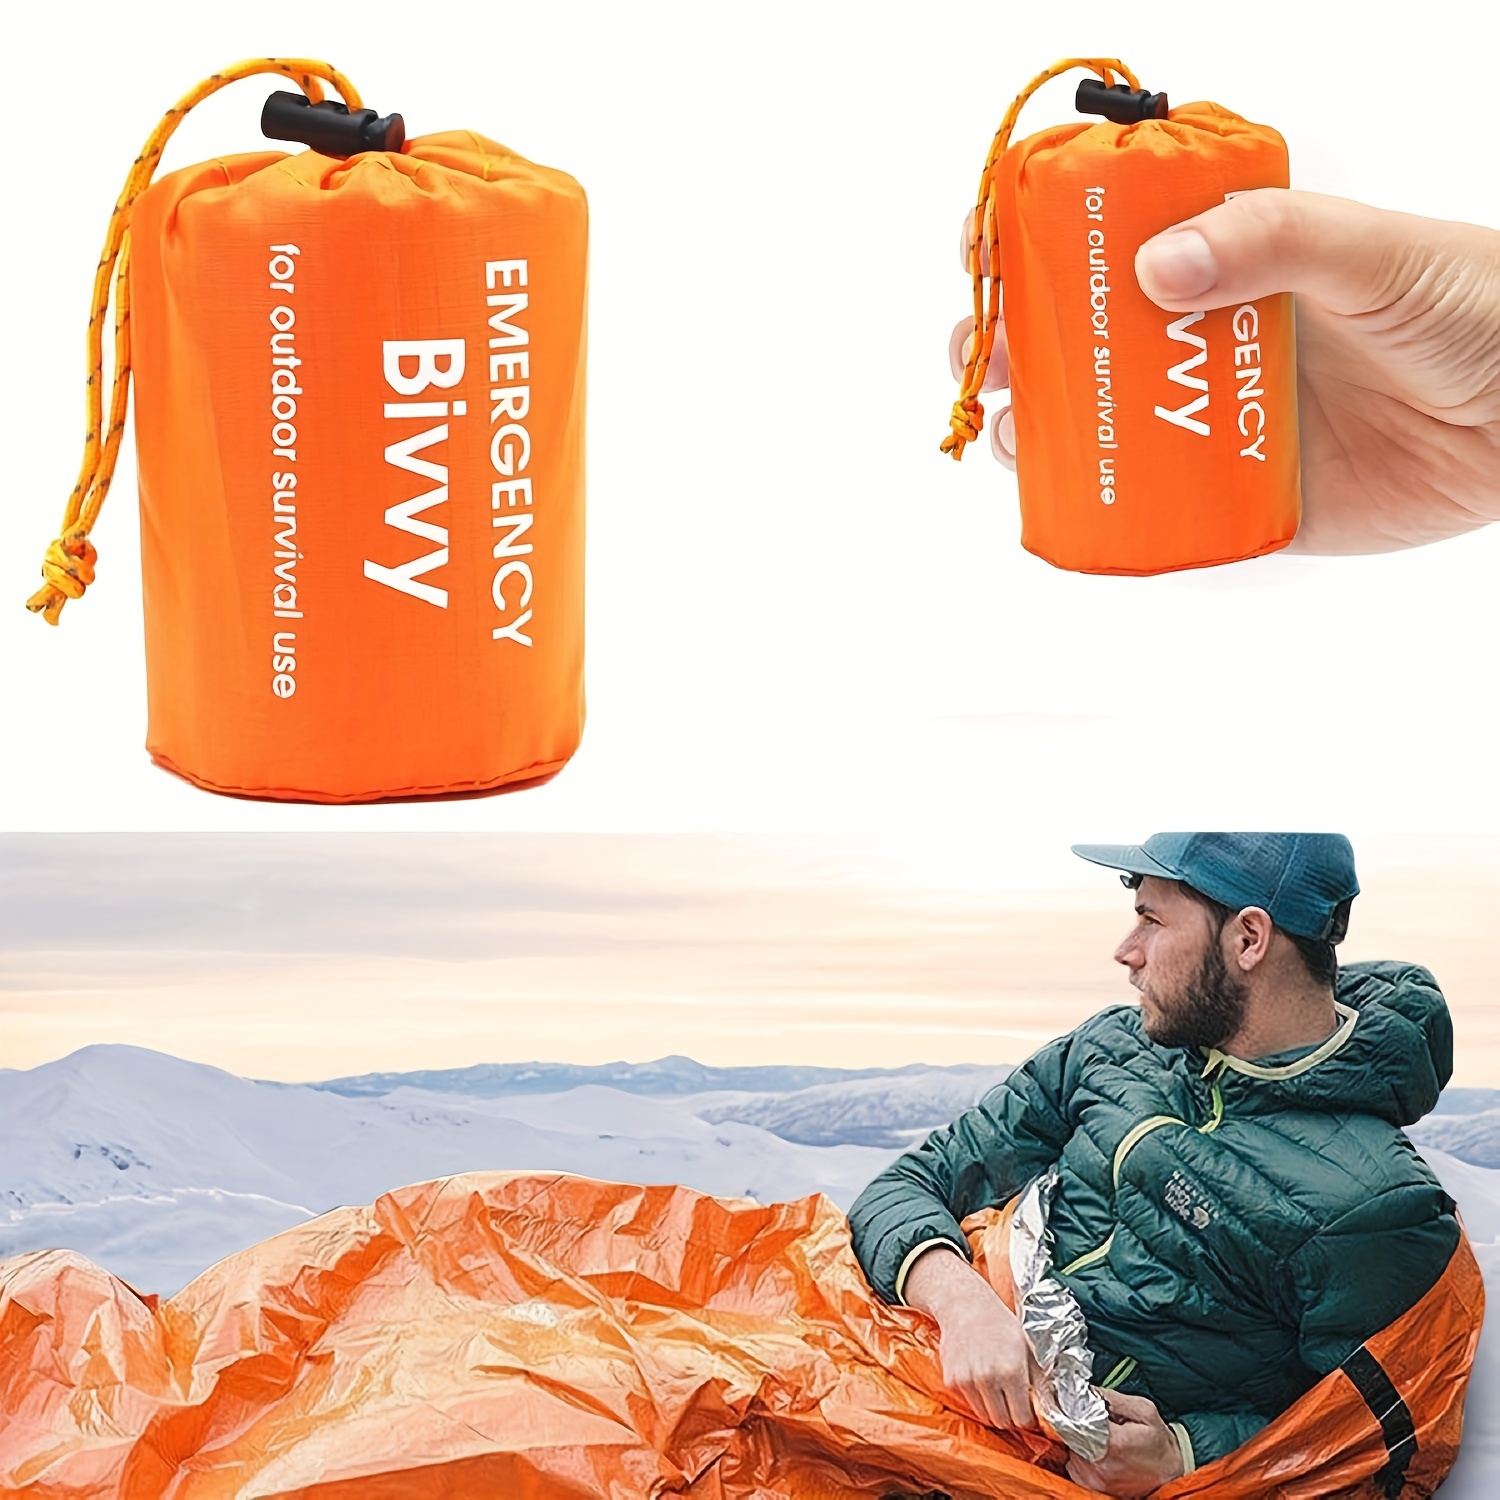 

Emergency Sleeping Bag: Reusable Survival Blanket For Outdoor Camping, Hiking & Rescue - Lightweight & Easy To Carry!